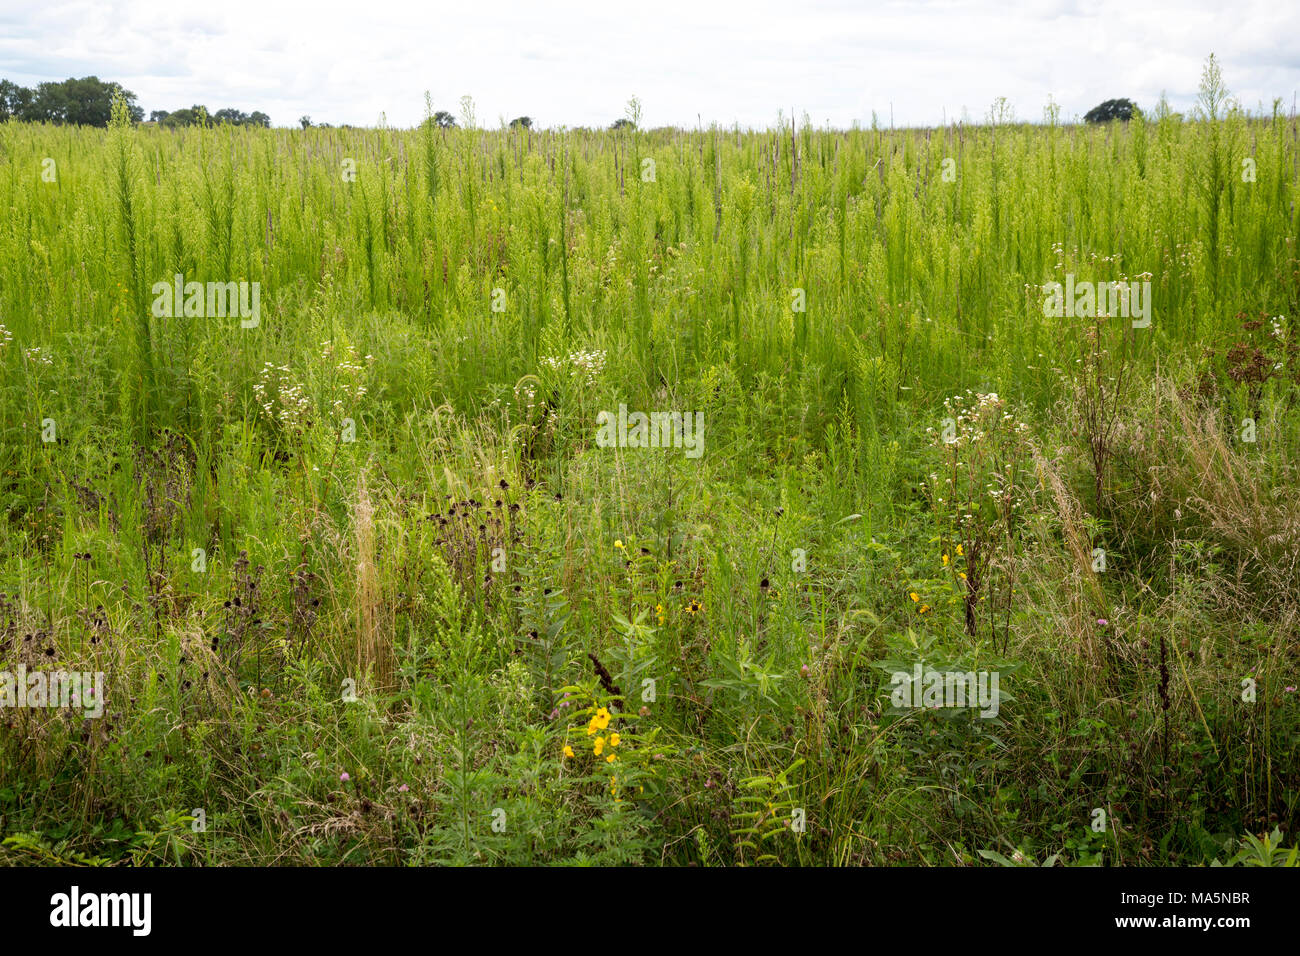 A Conservation Reserve Preserving Indigenous Wild Grasses and Flowers. Manchester, Iowa. Stock Photo